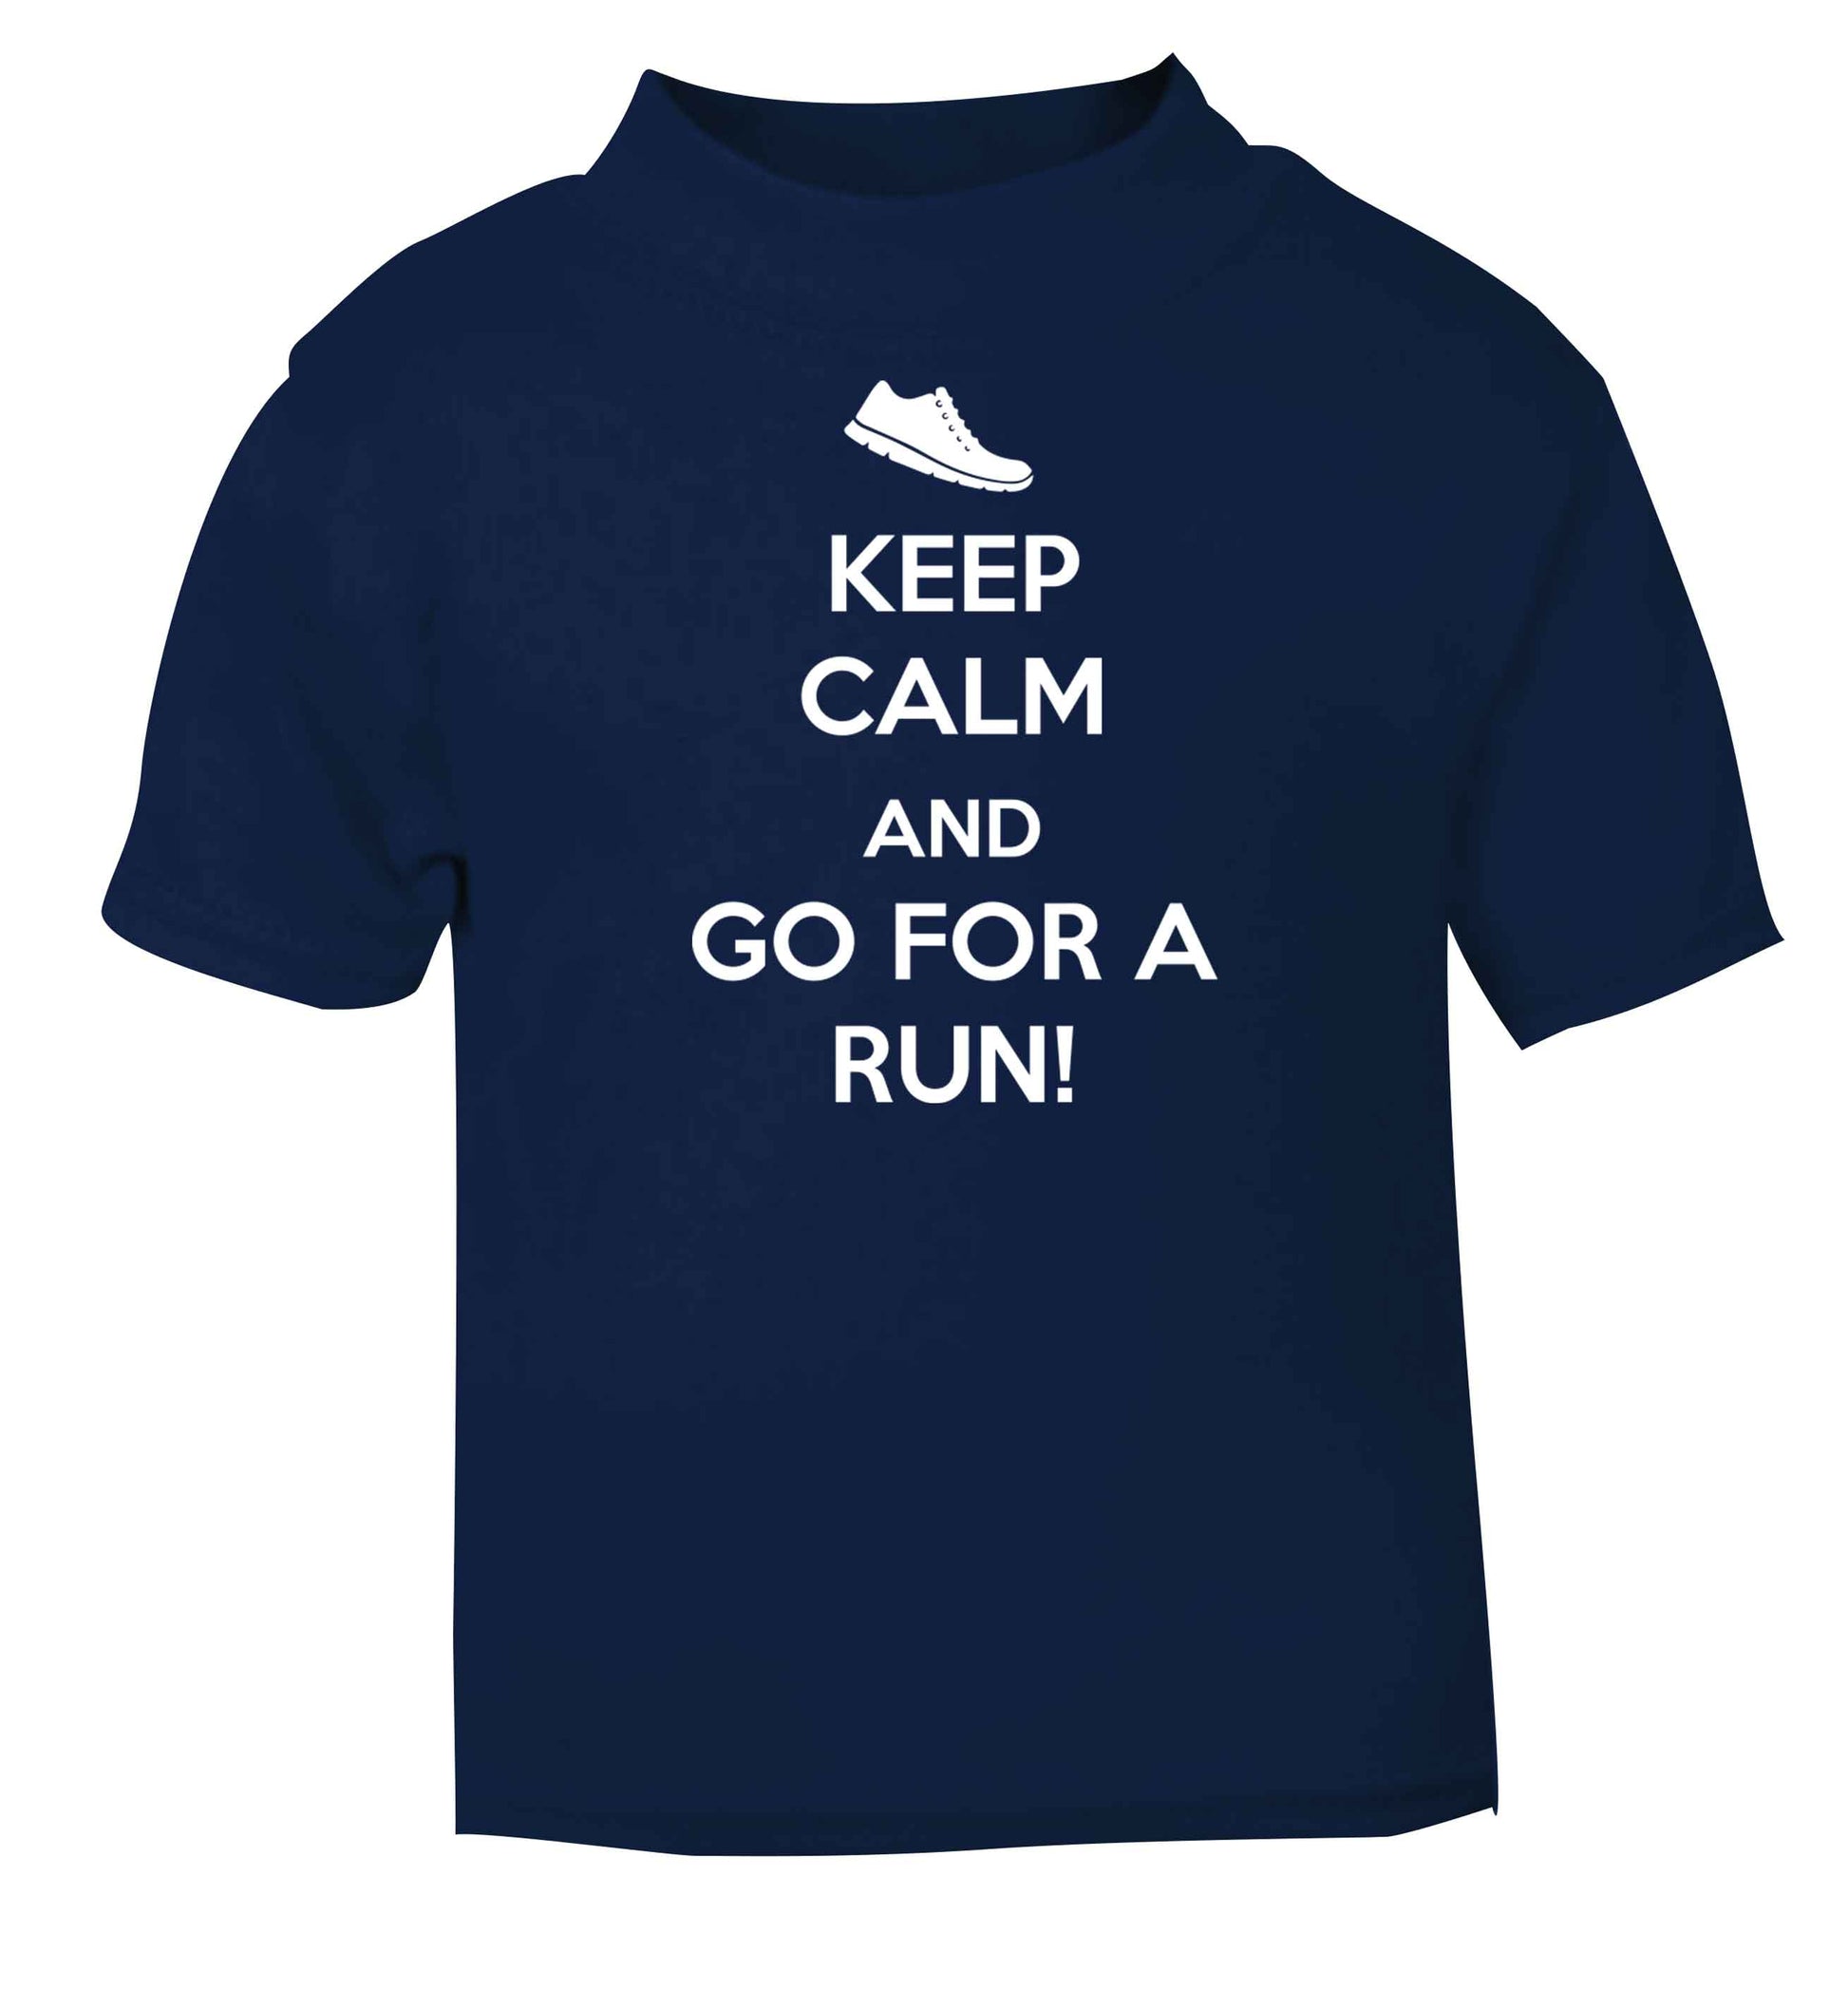 Keep calm and go for a run navy baby toddler Tshirt 2 Years